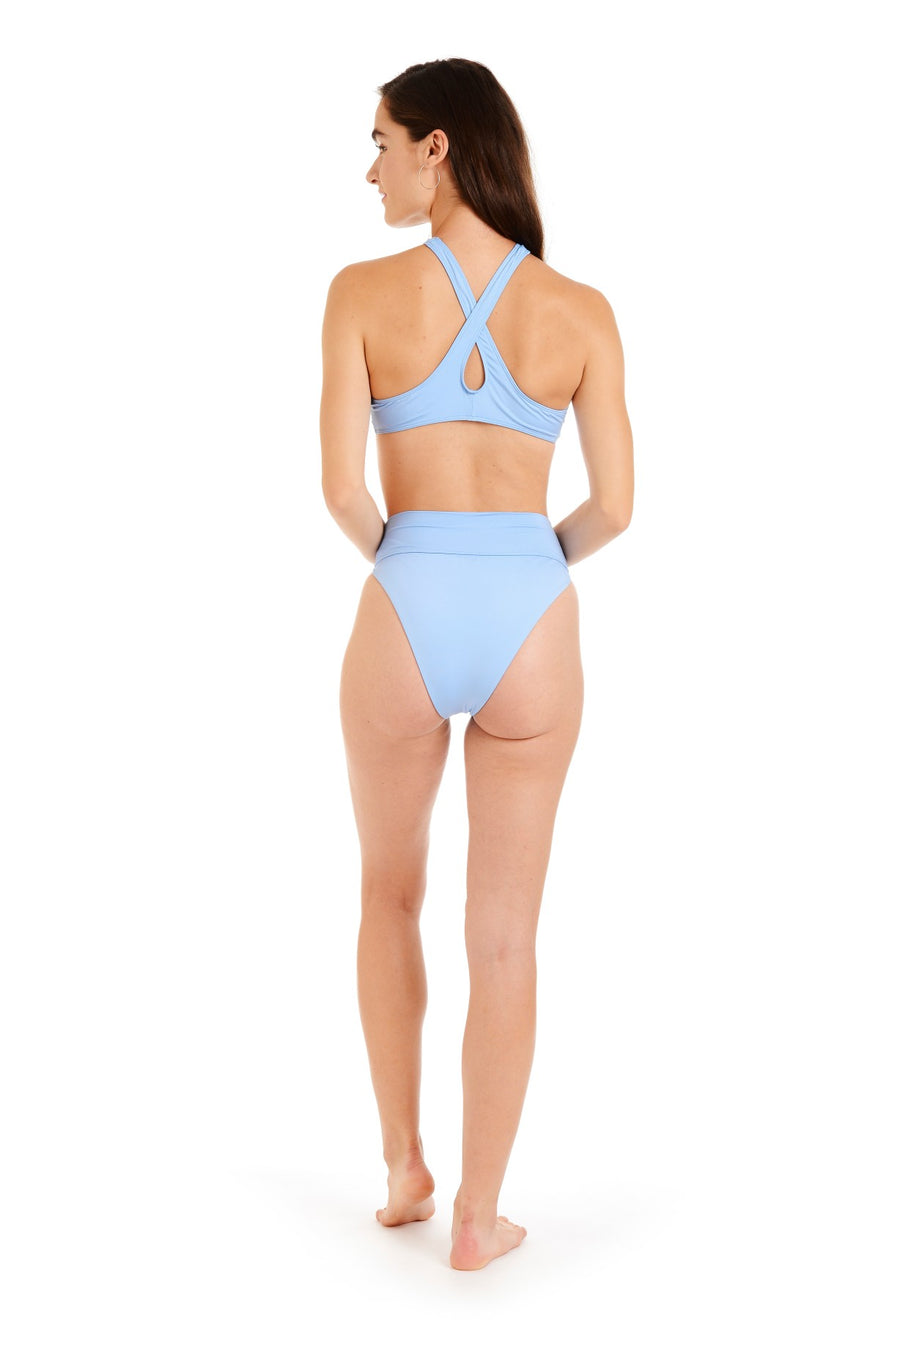 Back view of a woman in light blue swimsuit bottoms